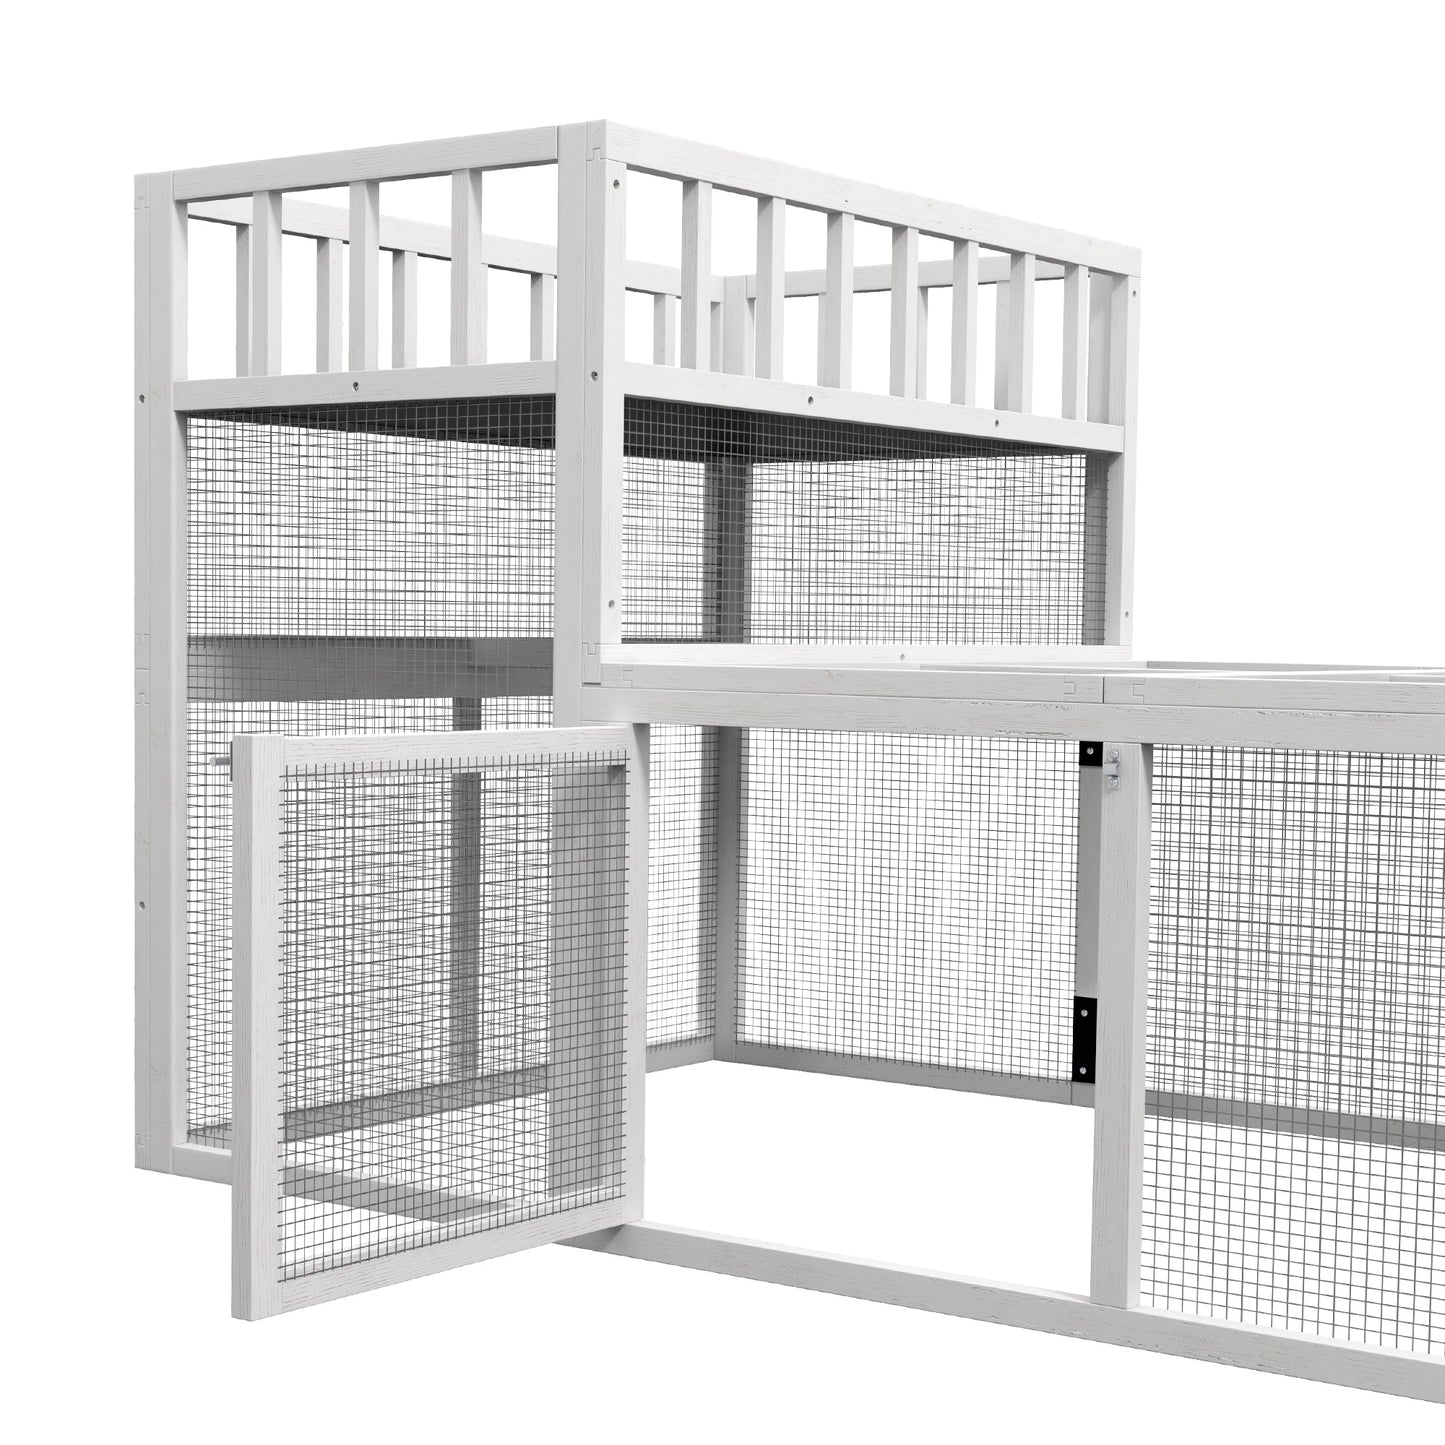 7.3' x 3.6' Wooden Chicken Coop Combinable Design with Storage Shelf for 2-4 Chickens, Ducks, Goose, Rabbits, White at Gallery Canada